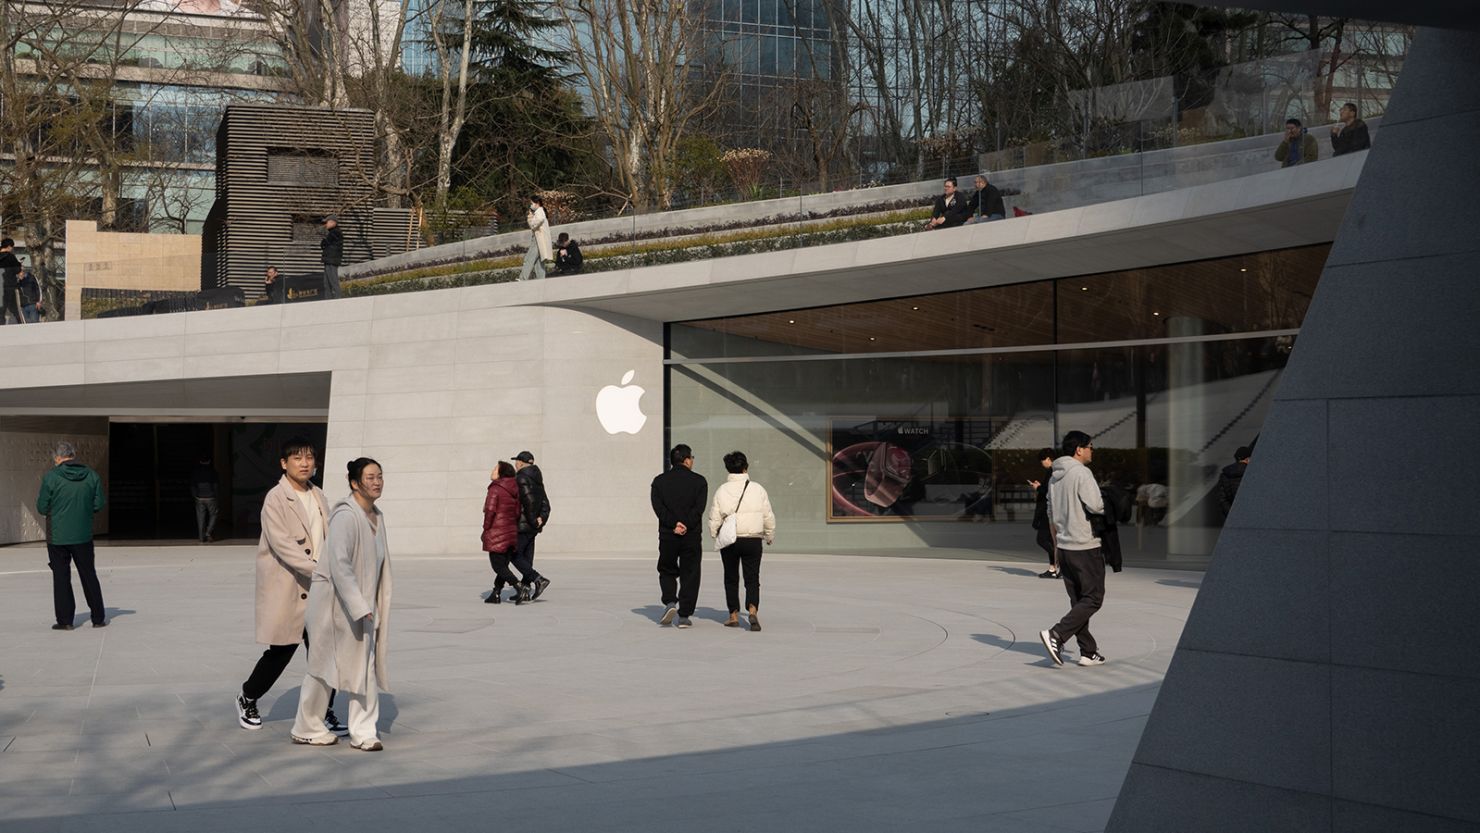 Apple's newest flagship store has opened in Shanghai.